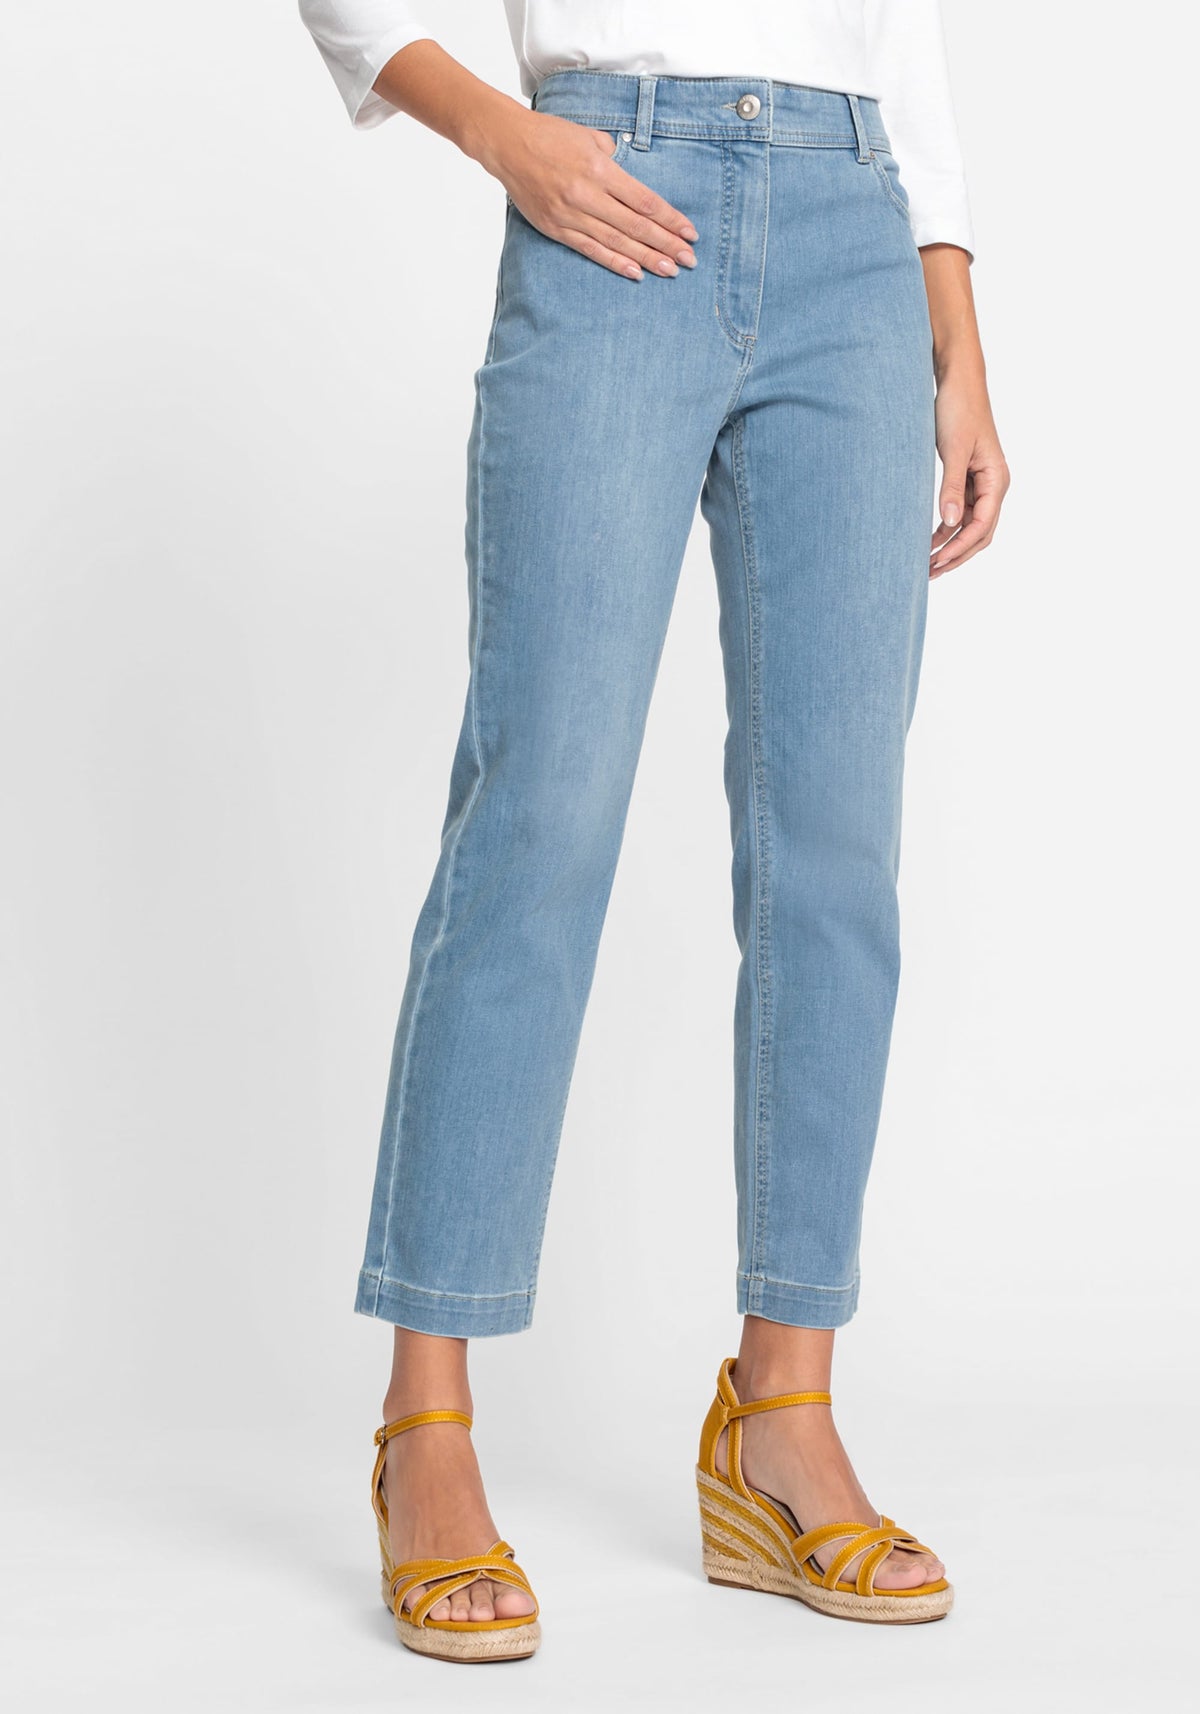 Mona Fit Straight Leg Jeans containing REPREVE®